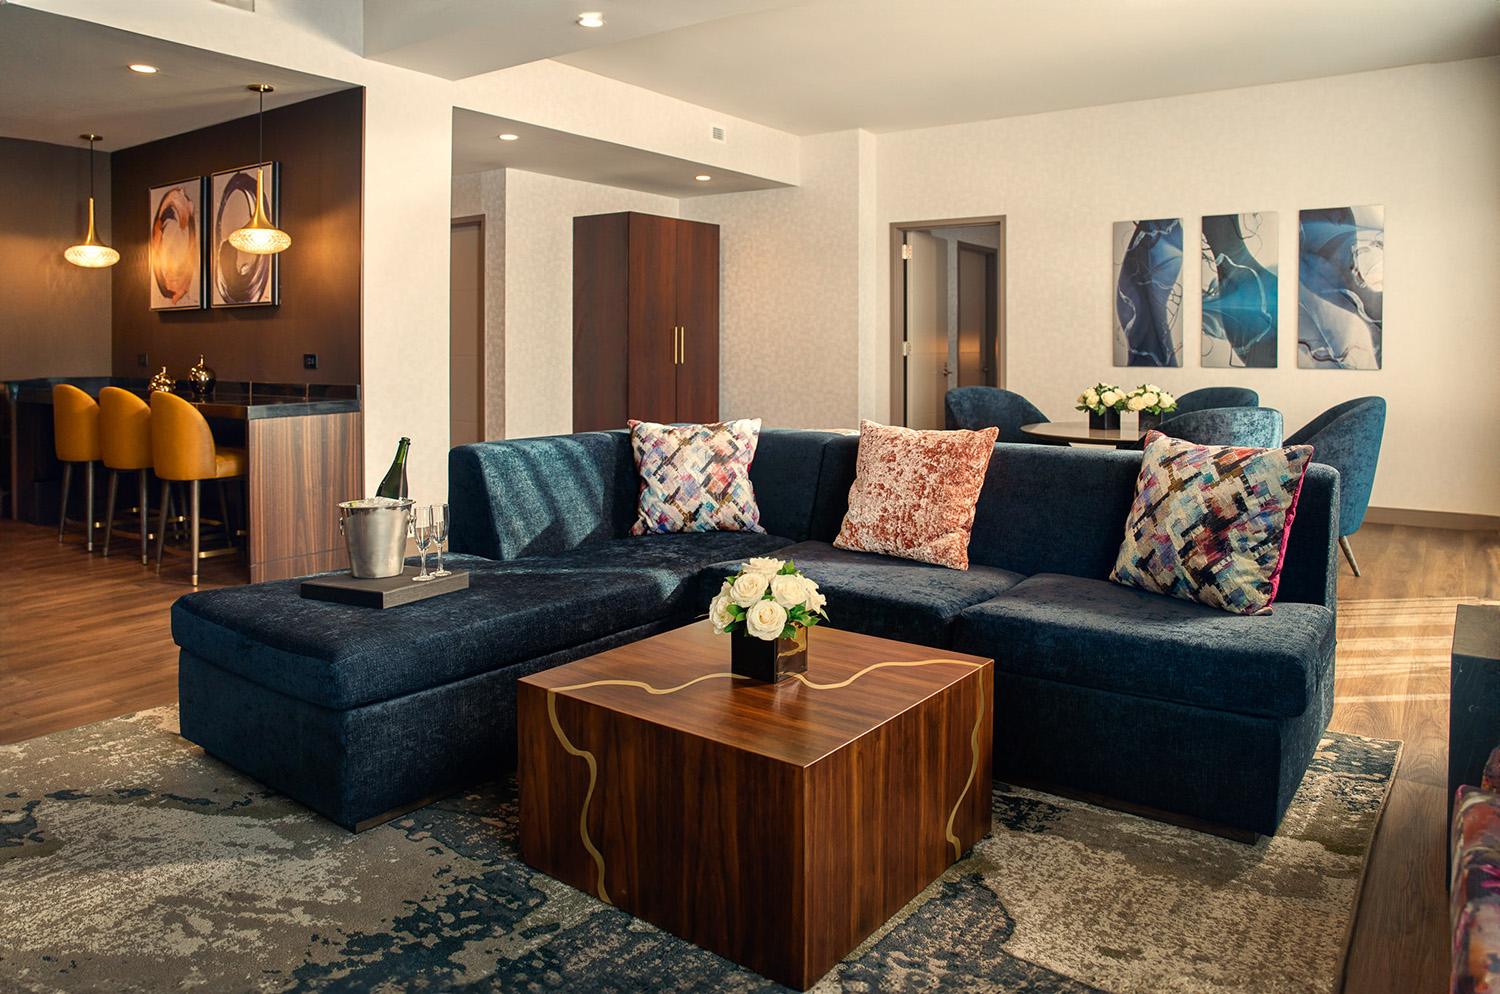 A modern hotel room with a large sectional, reclaimed wood coffee table and bar seating